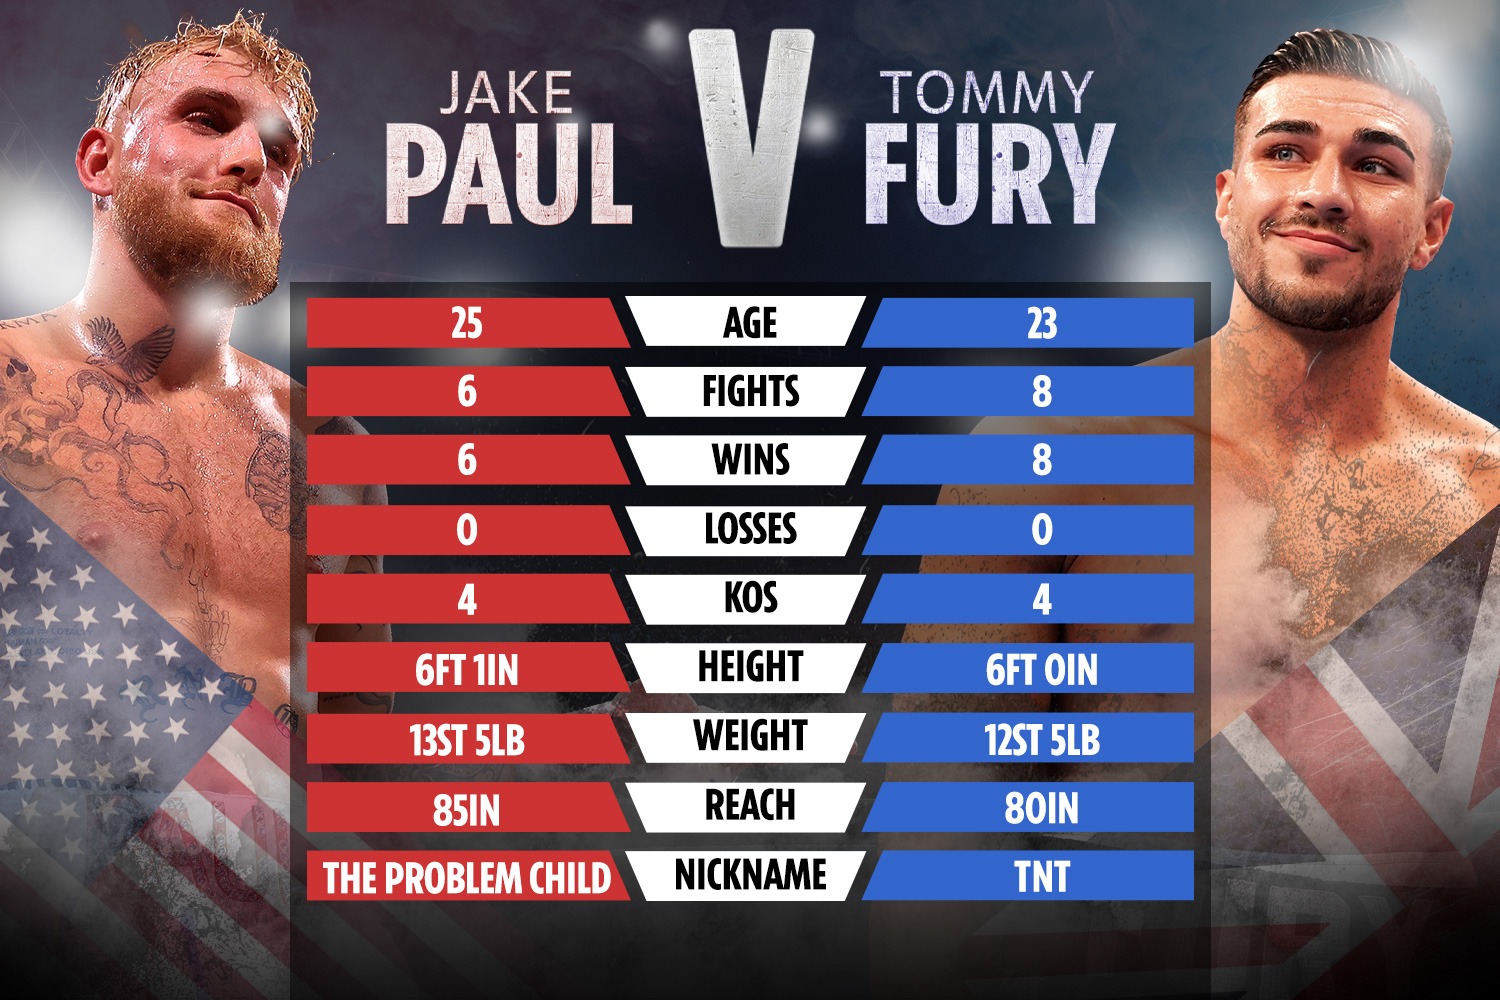 , ‘I don’t like him’ – Tommy Fury says Jake Paul fight is personal and vows to ‘break his face in’ after agreeing new bout